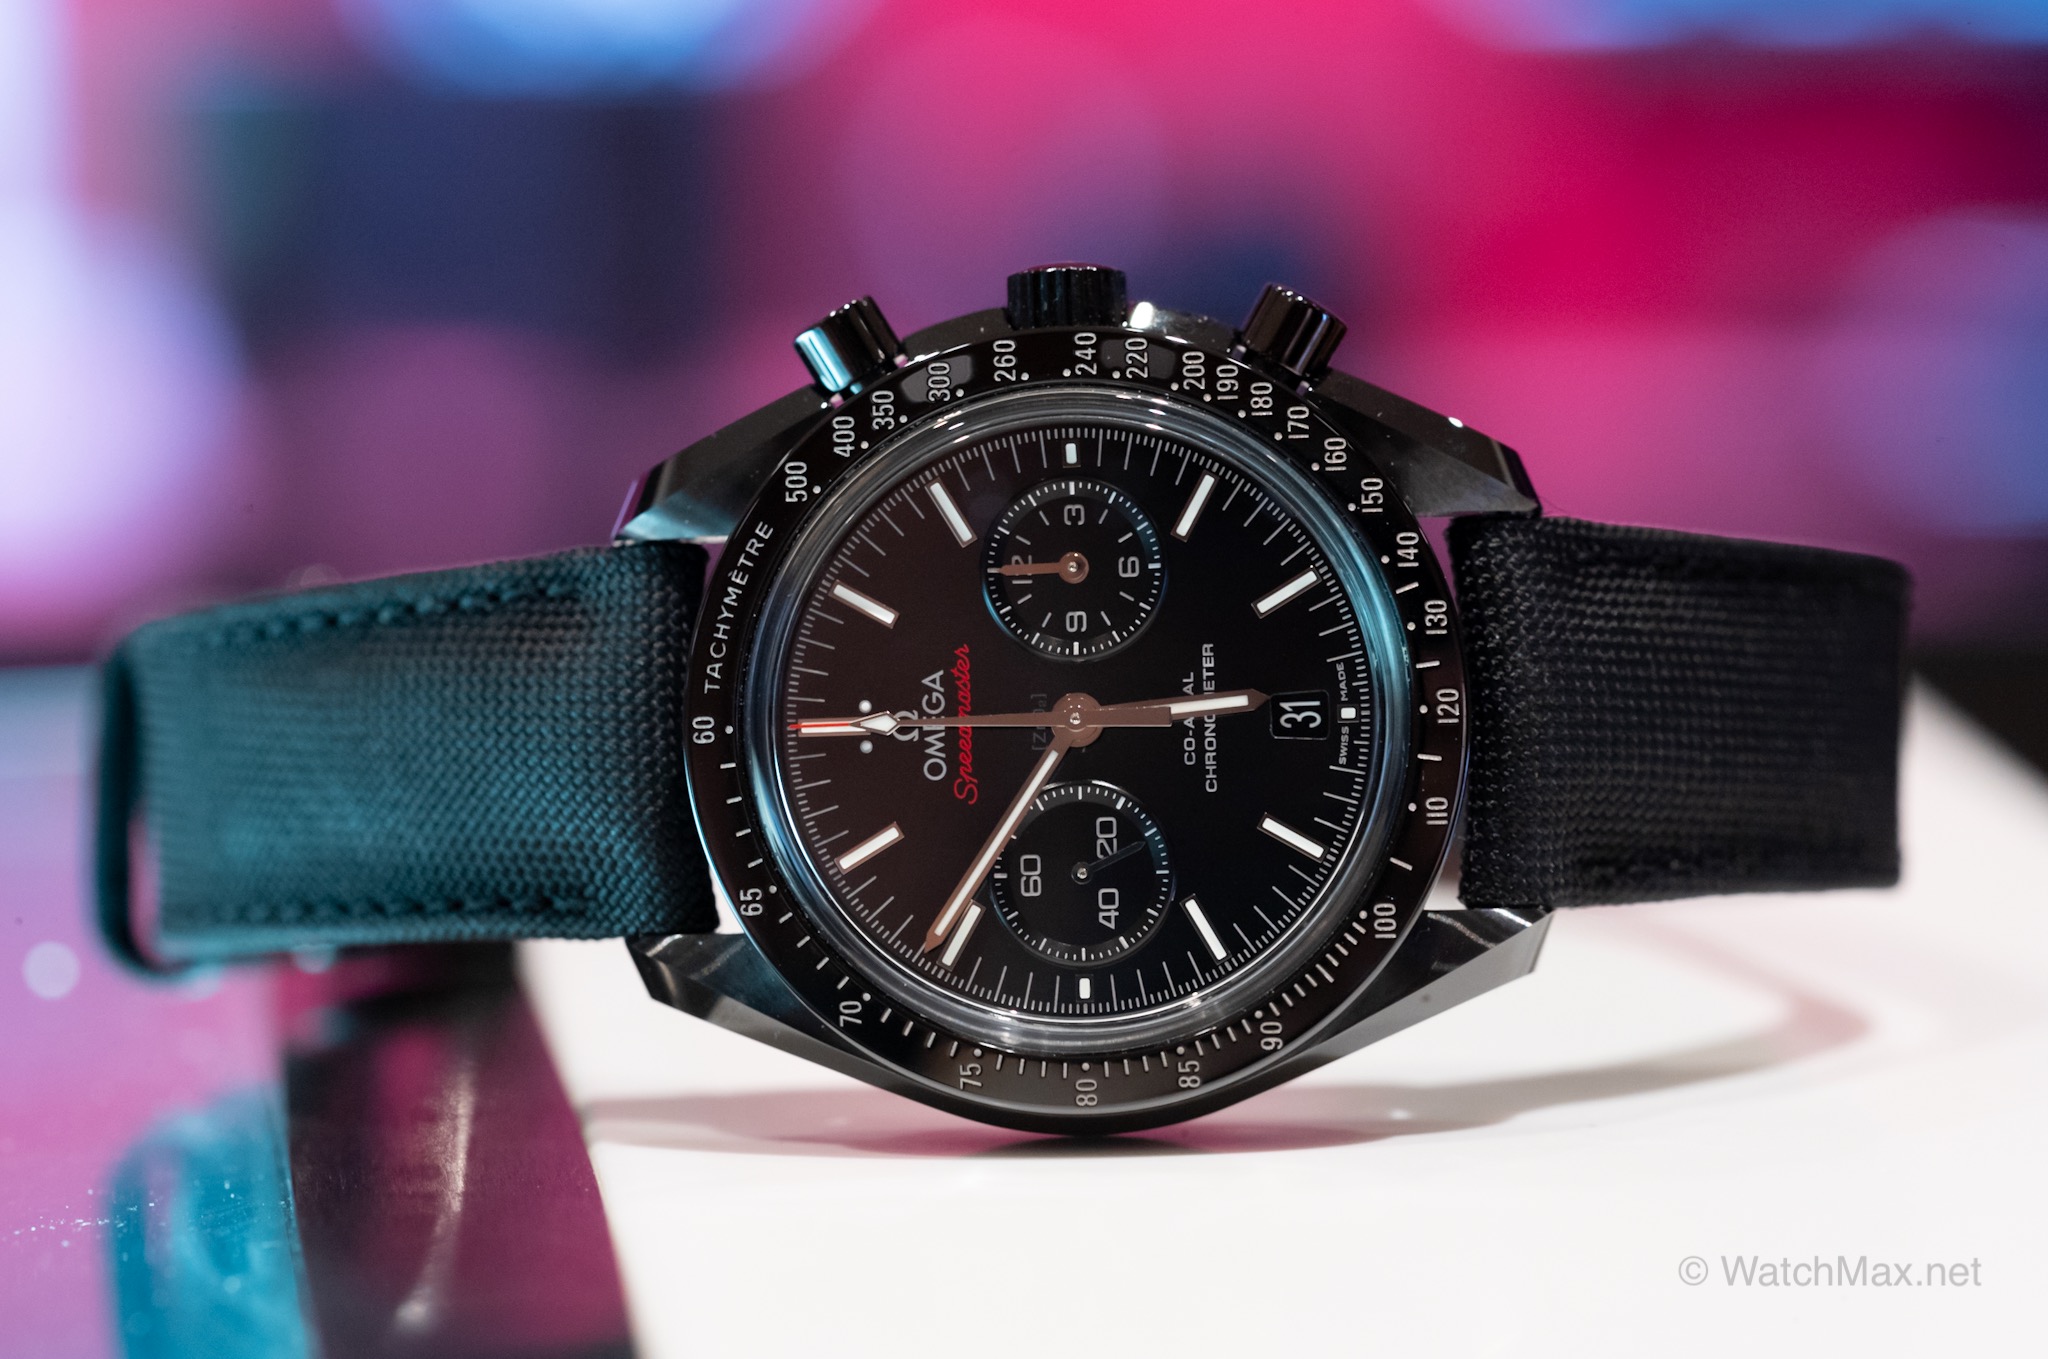 Thoughts on the Omega Speedmaster 